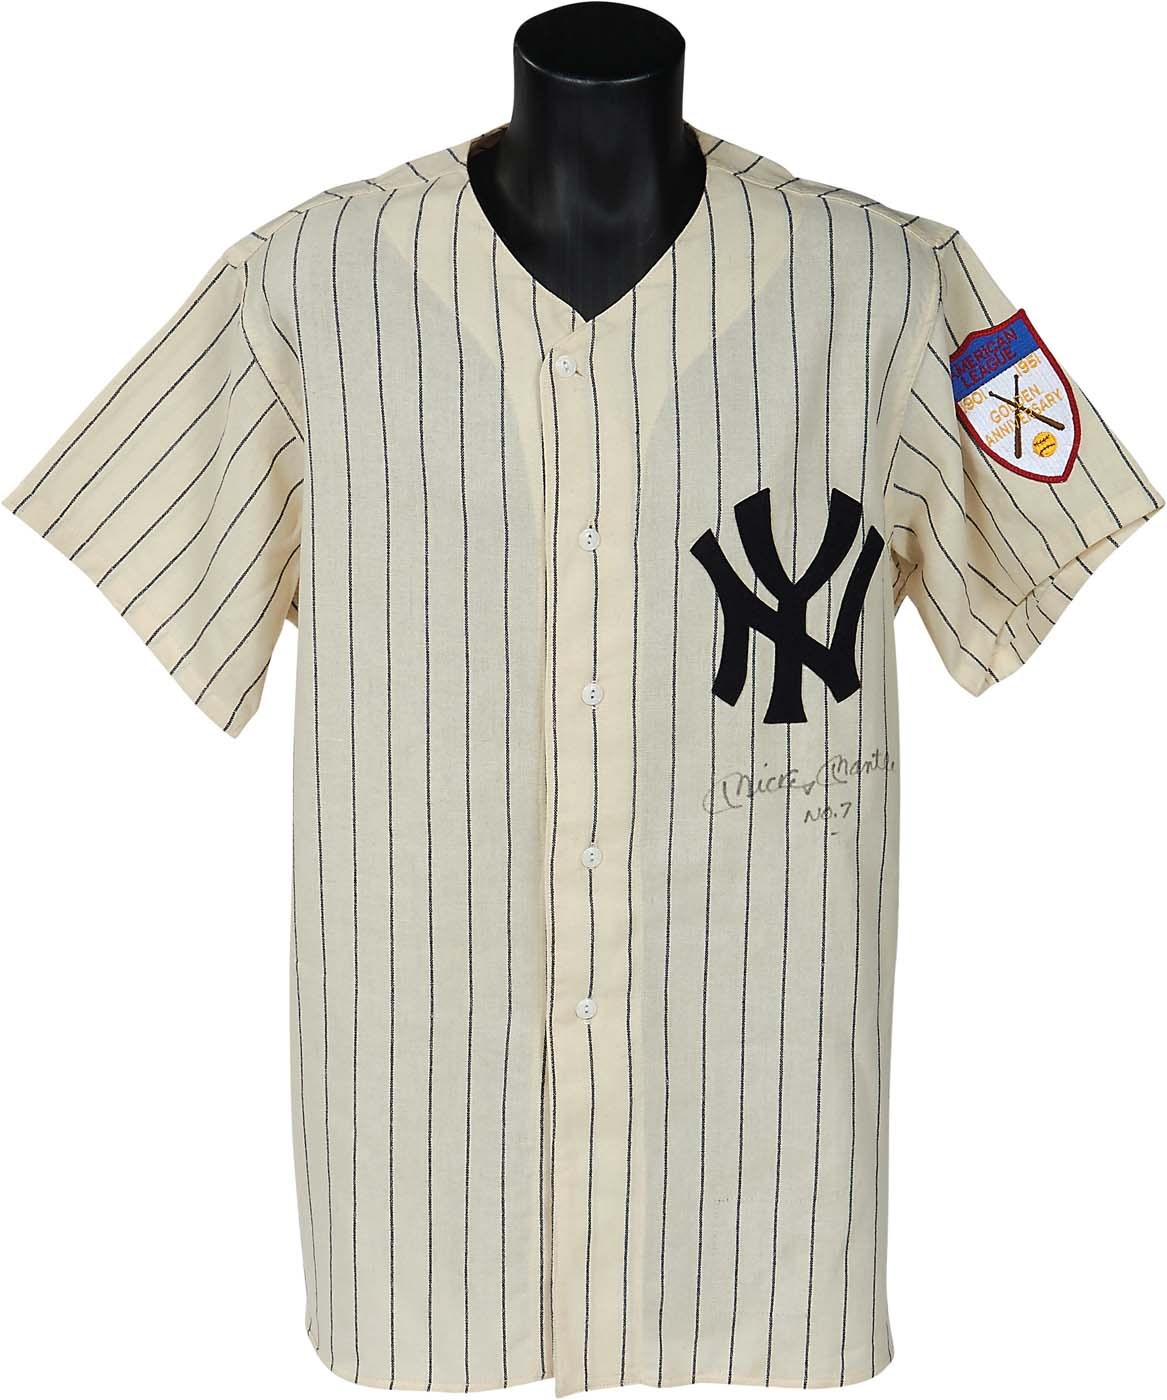 - Mickey Mantle "No.7" Signed Commemorative 1951 Yankees Jersey (PSA)